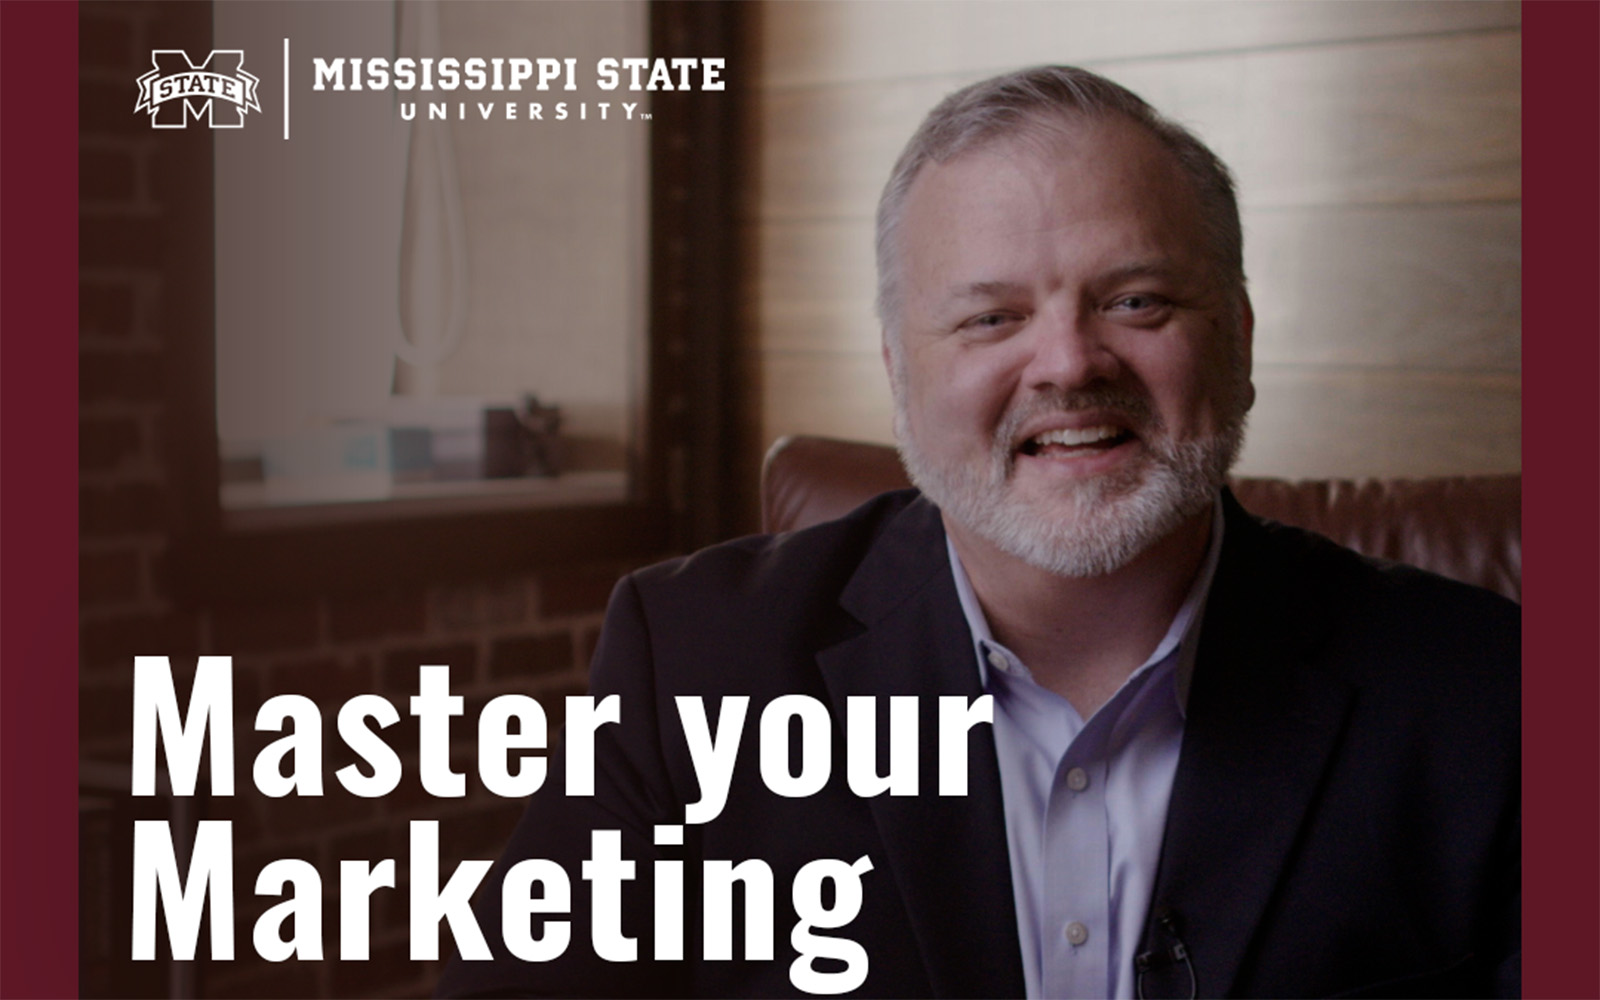 Small businesses encouraged to register by June 2 for MSU’s Master Your Marketing course